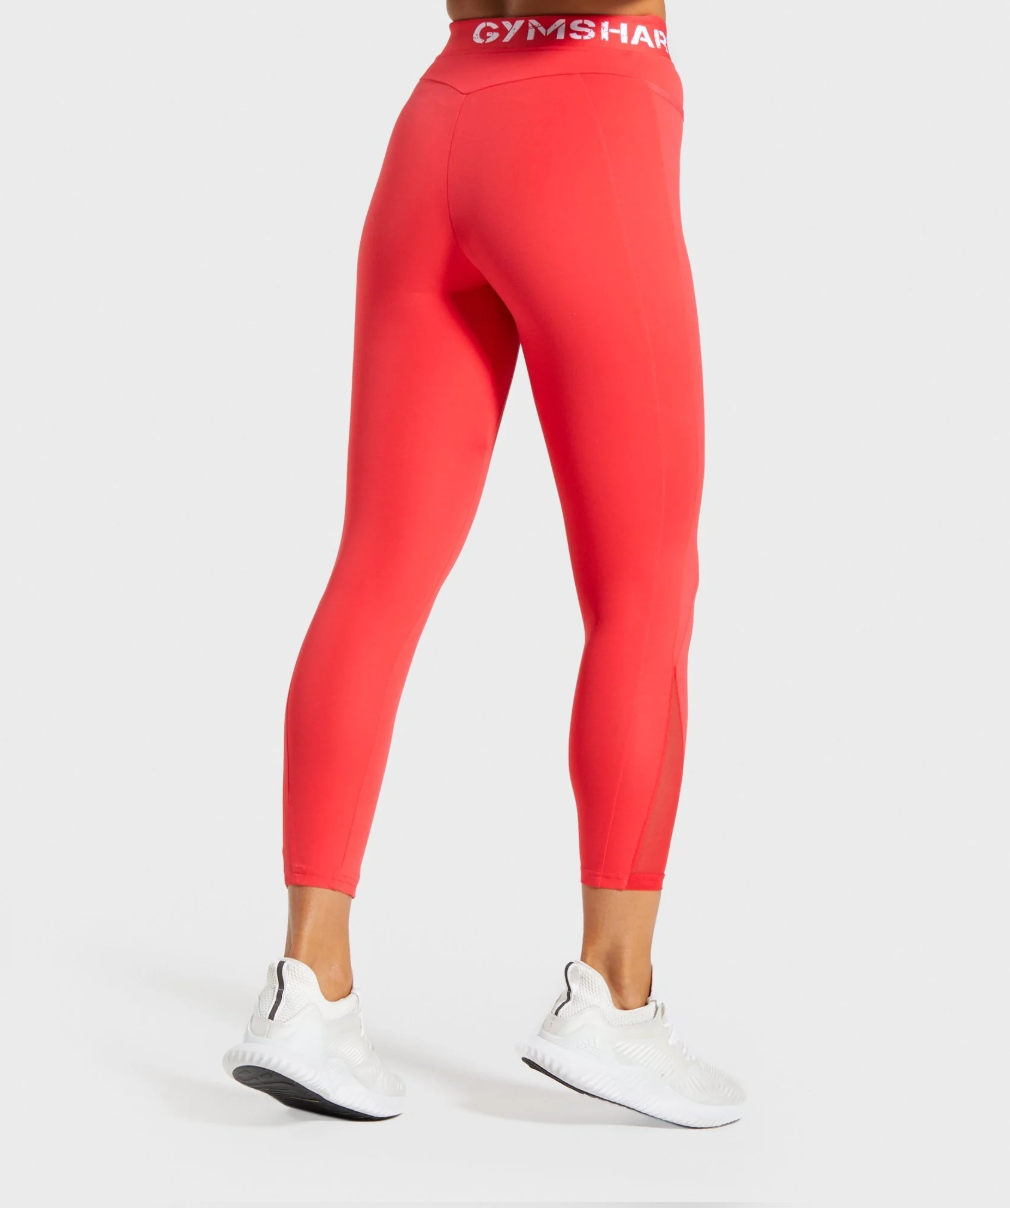 Gymshark Legacy Fitness Panel Leggings Pink Size L - $36 (40% Off Retail) -  From leah